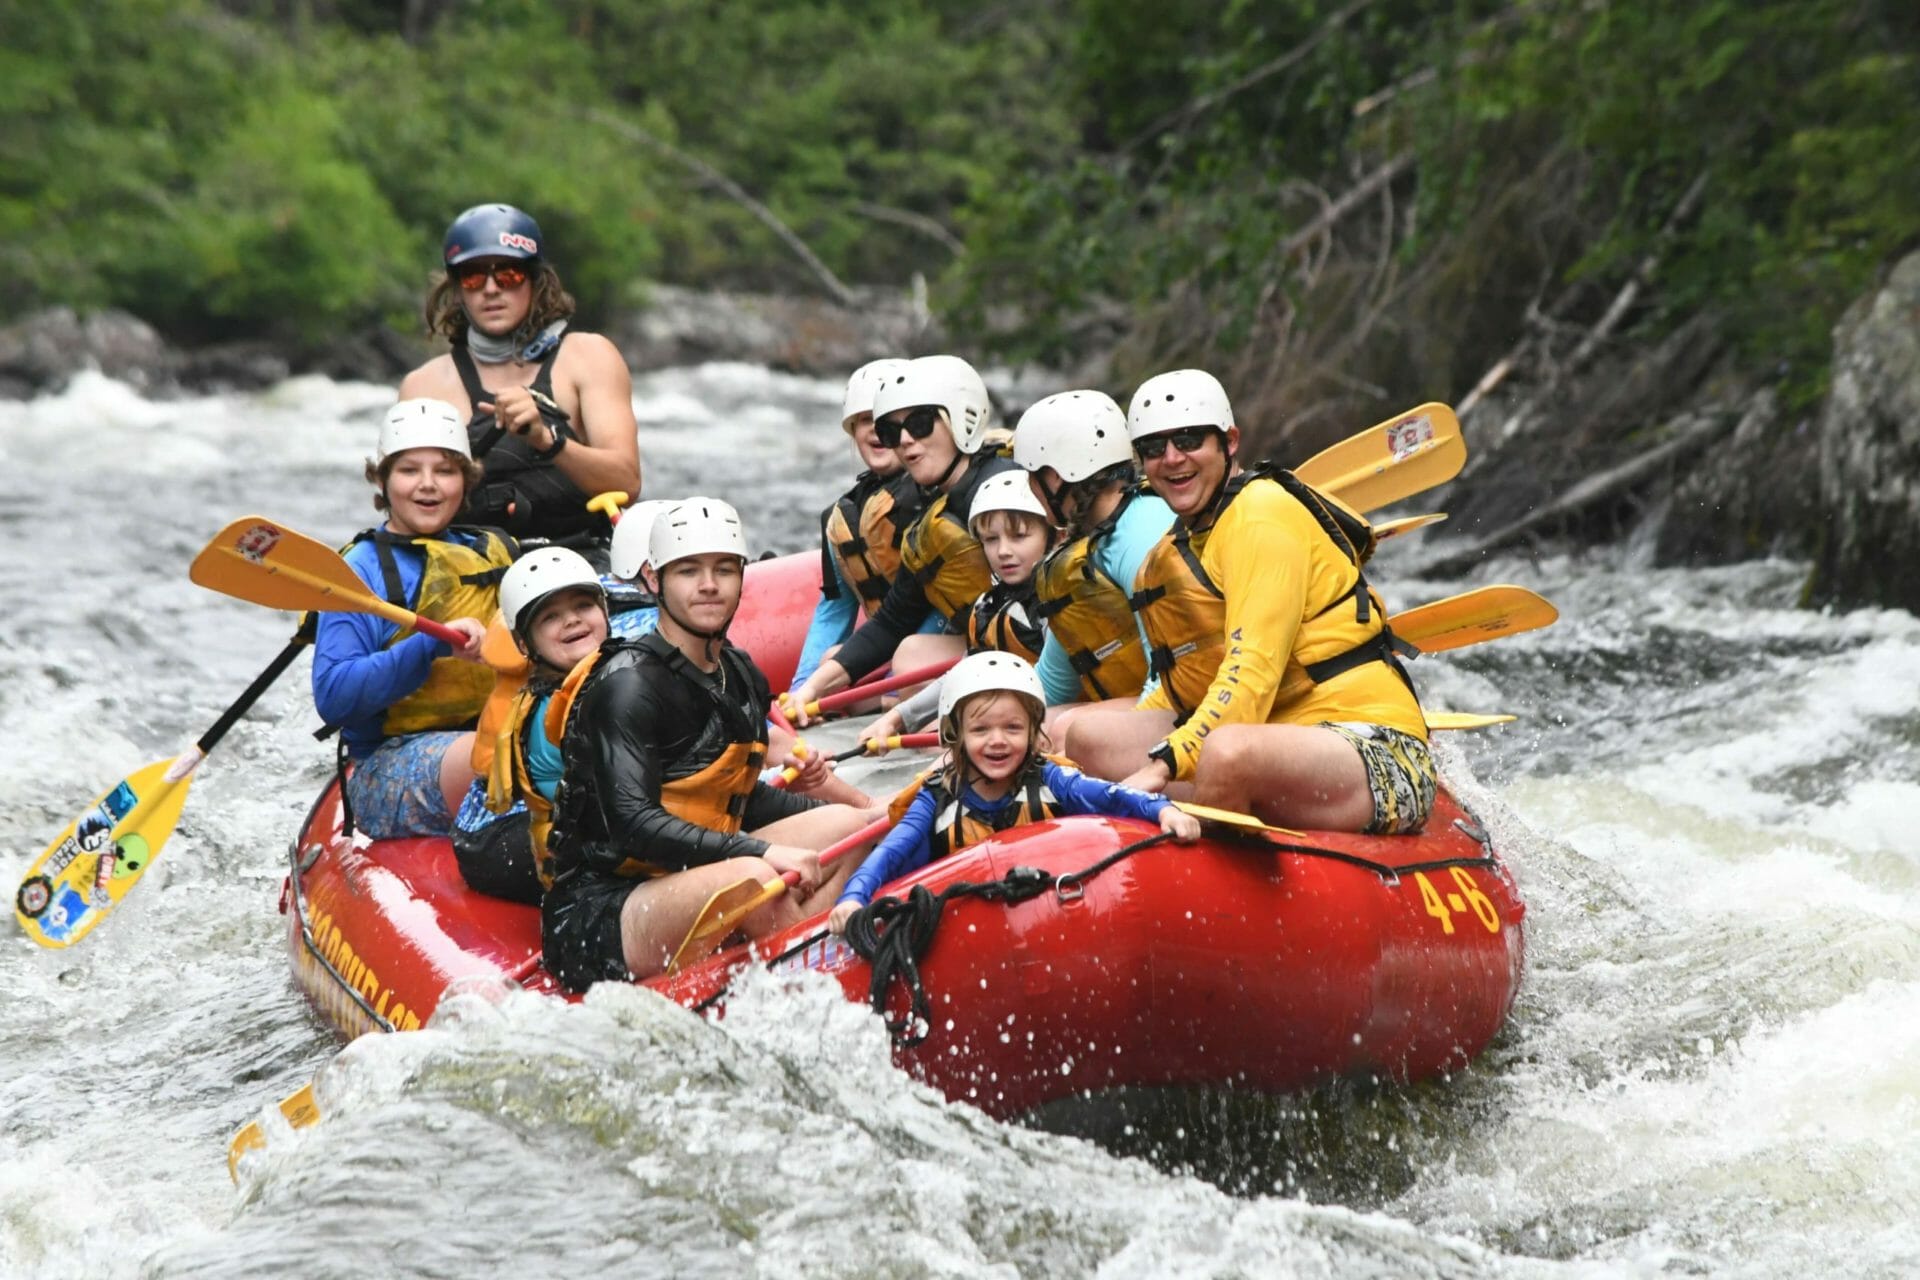 Family fun on the Kennebec River whitewater rafting in Maine